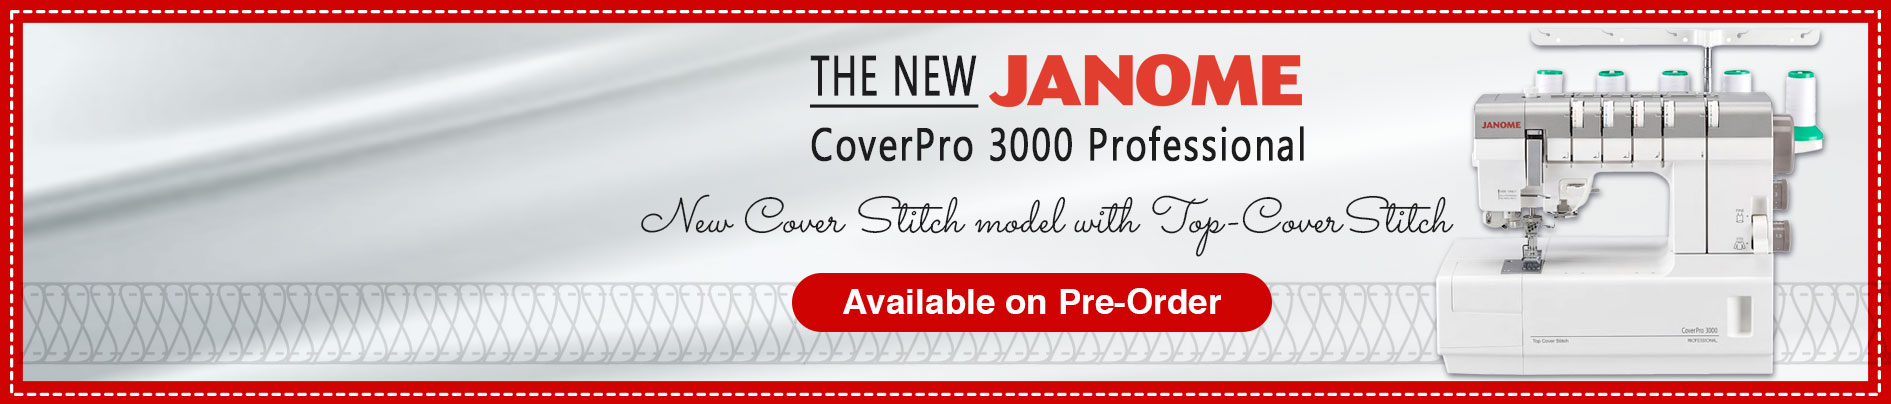 The Janome Cover Pro 3000 Professional is now available!